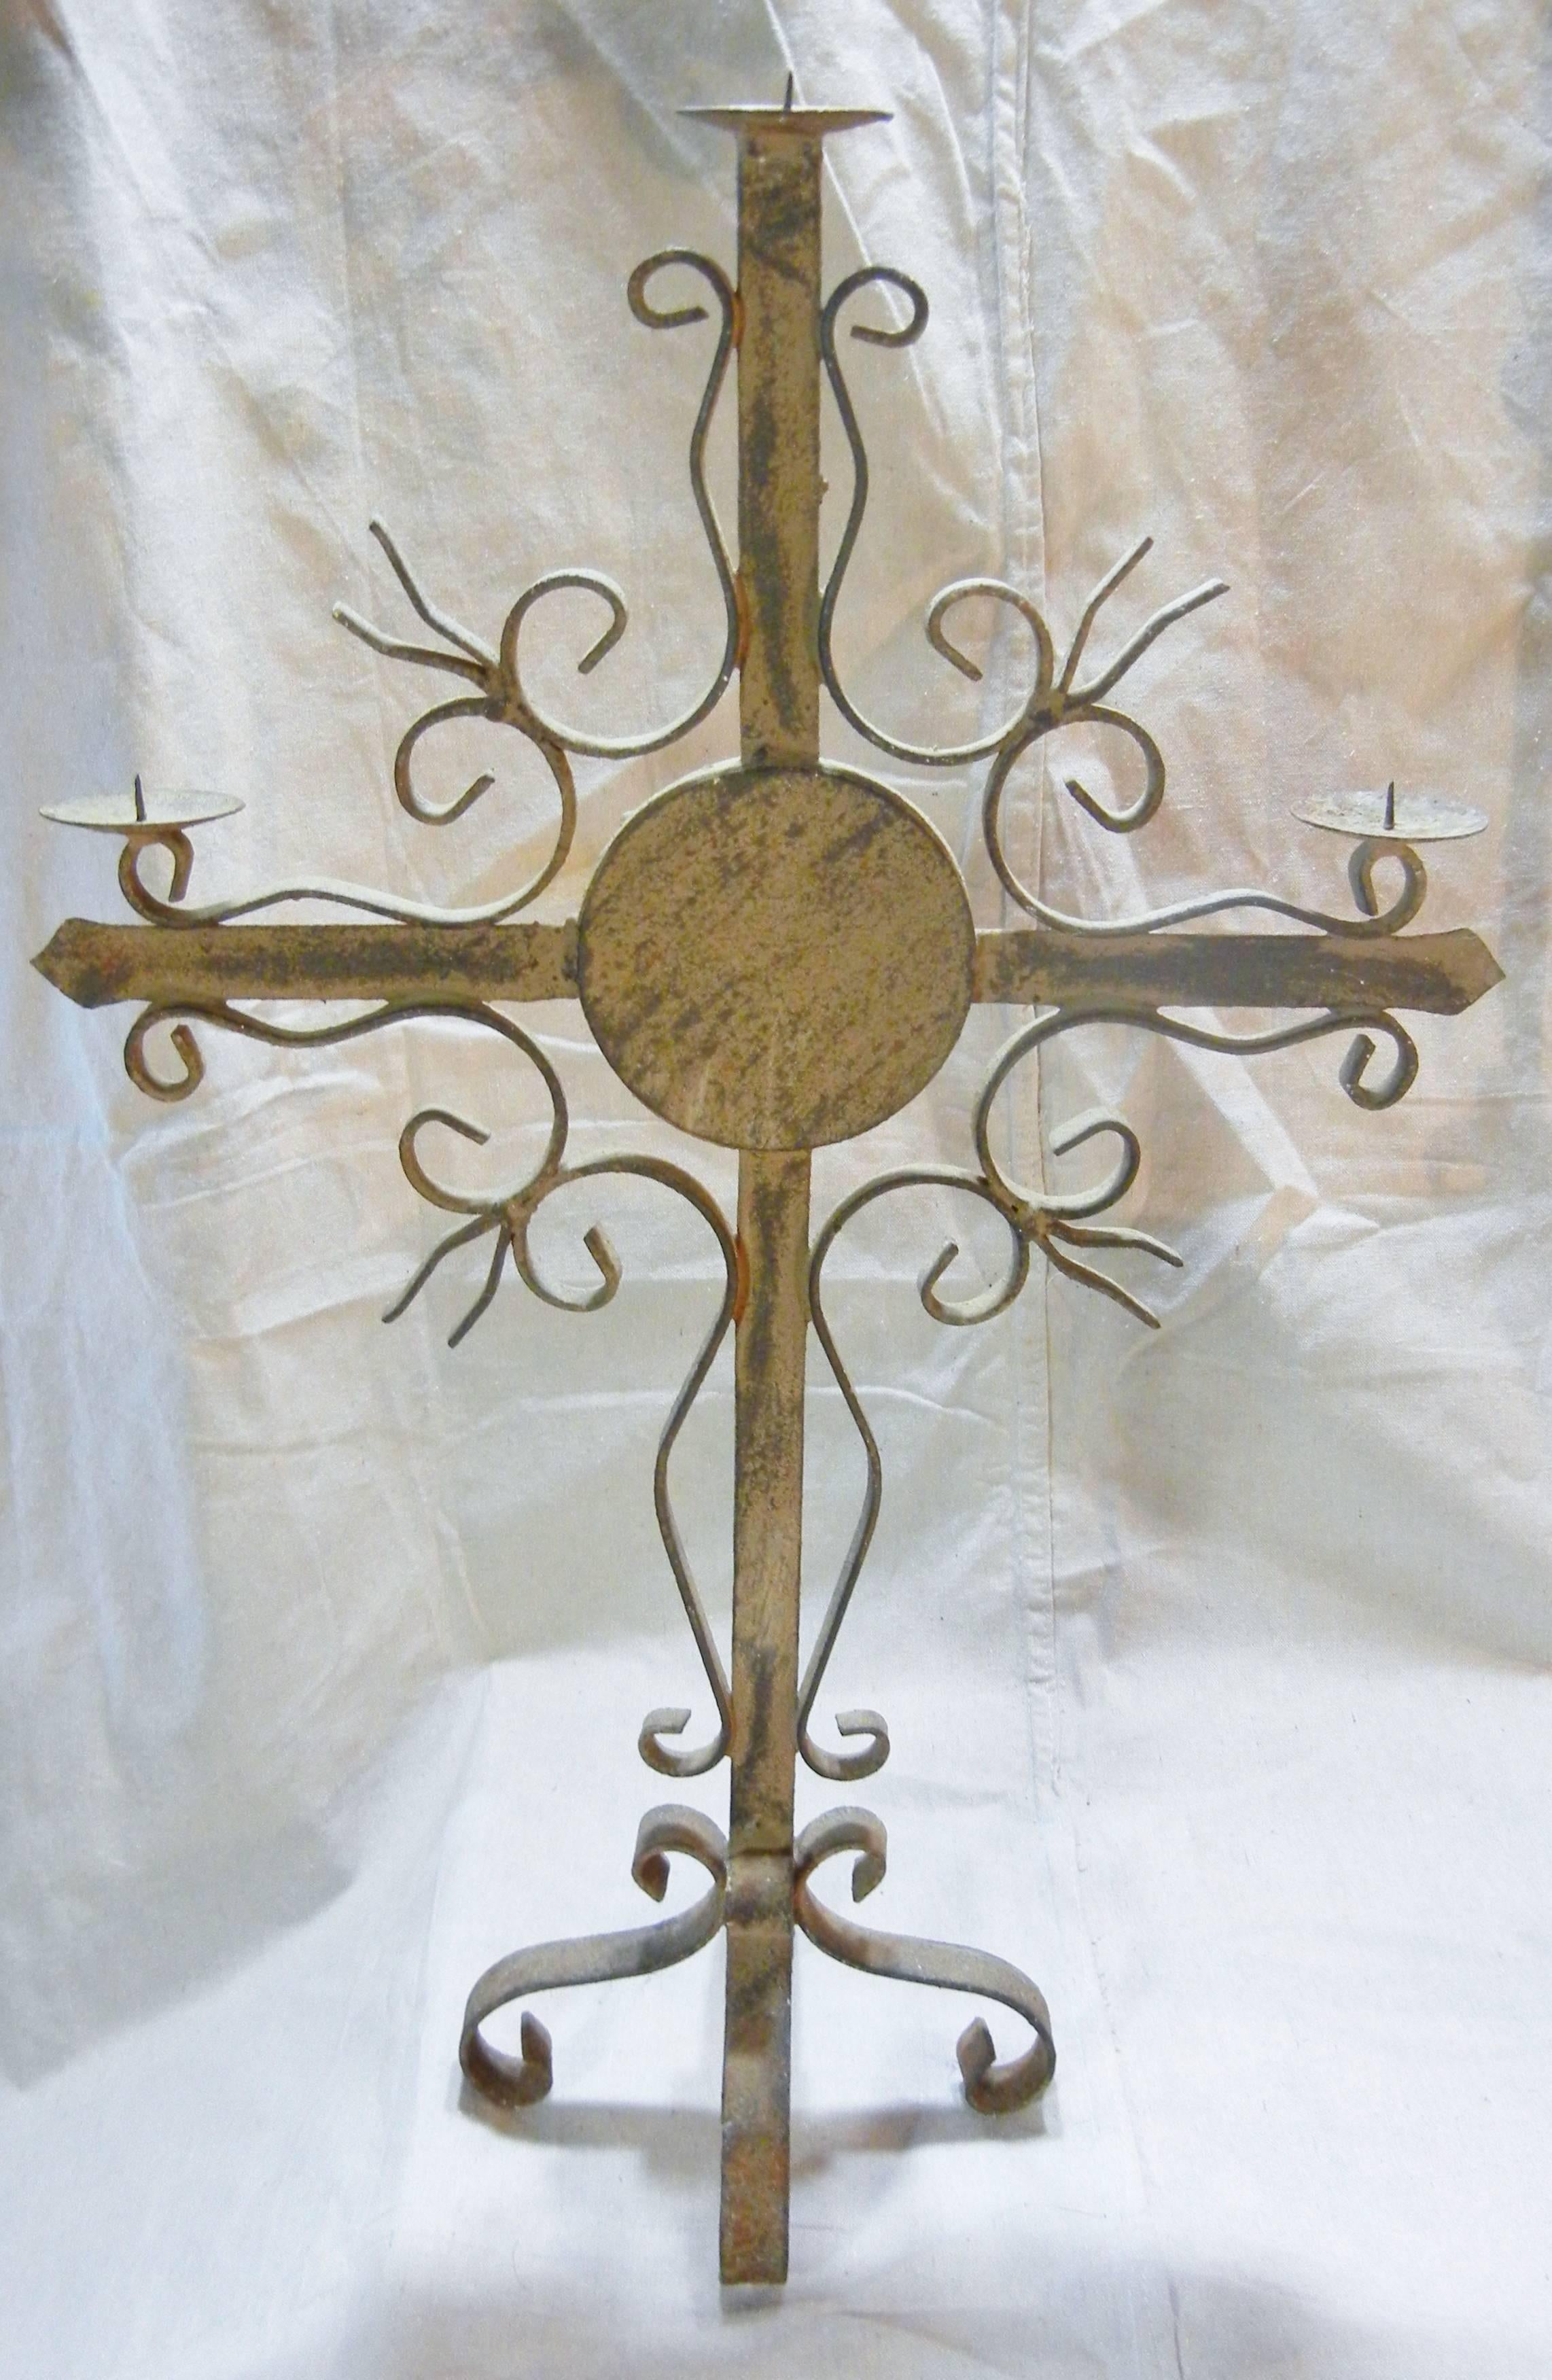 Hand-Crafted Pair of Gothic Revival Wrought Iron Candelabra, Weathered Patina, Quebec, 1880